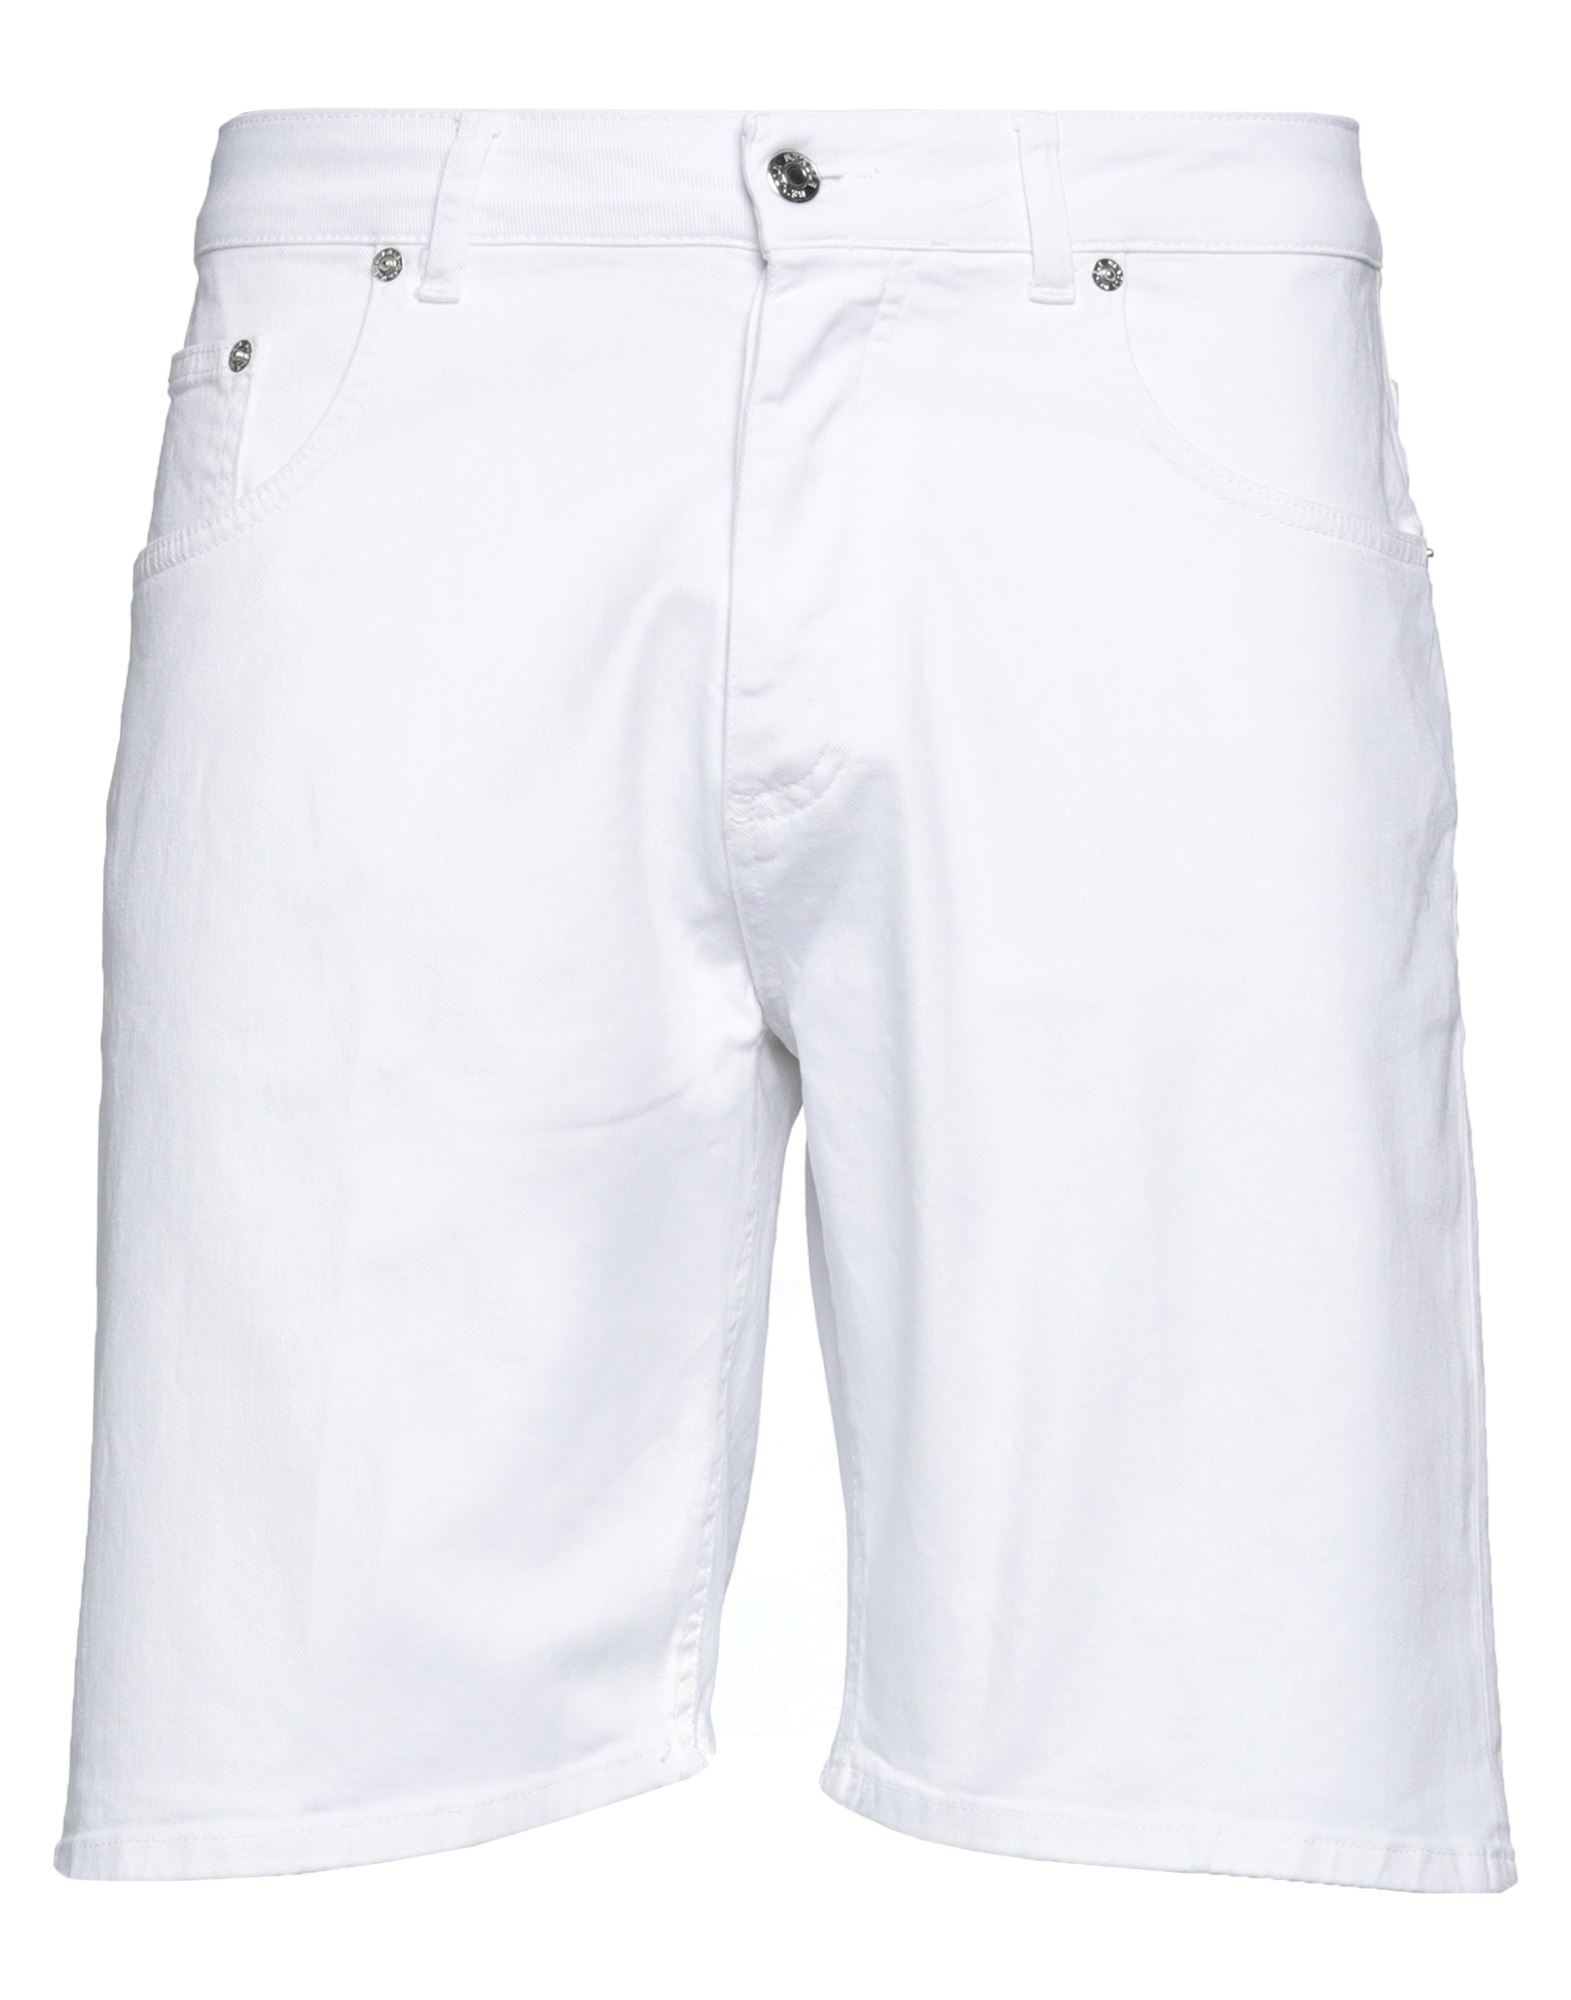 BE ABLE Jeansshorts Herren Weiß von BE ABLE